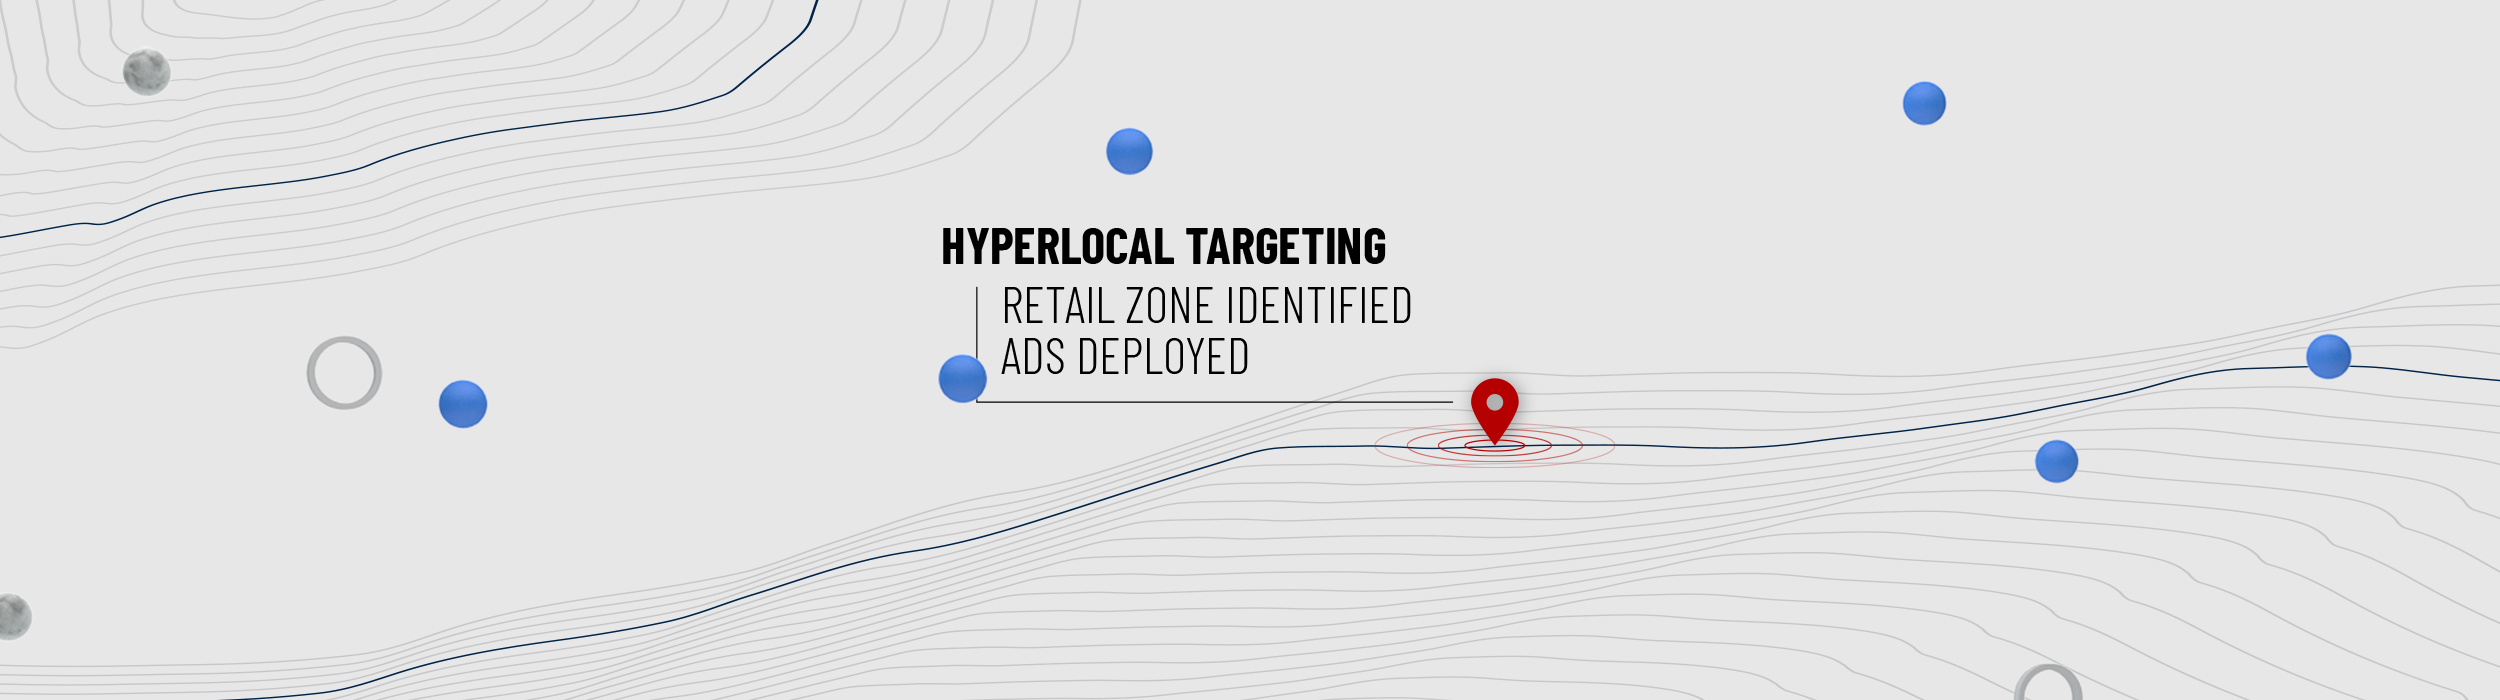 Marketing Architects Improves Streaming TV Targeting With New Hyperlocal Capabilities